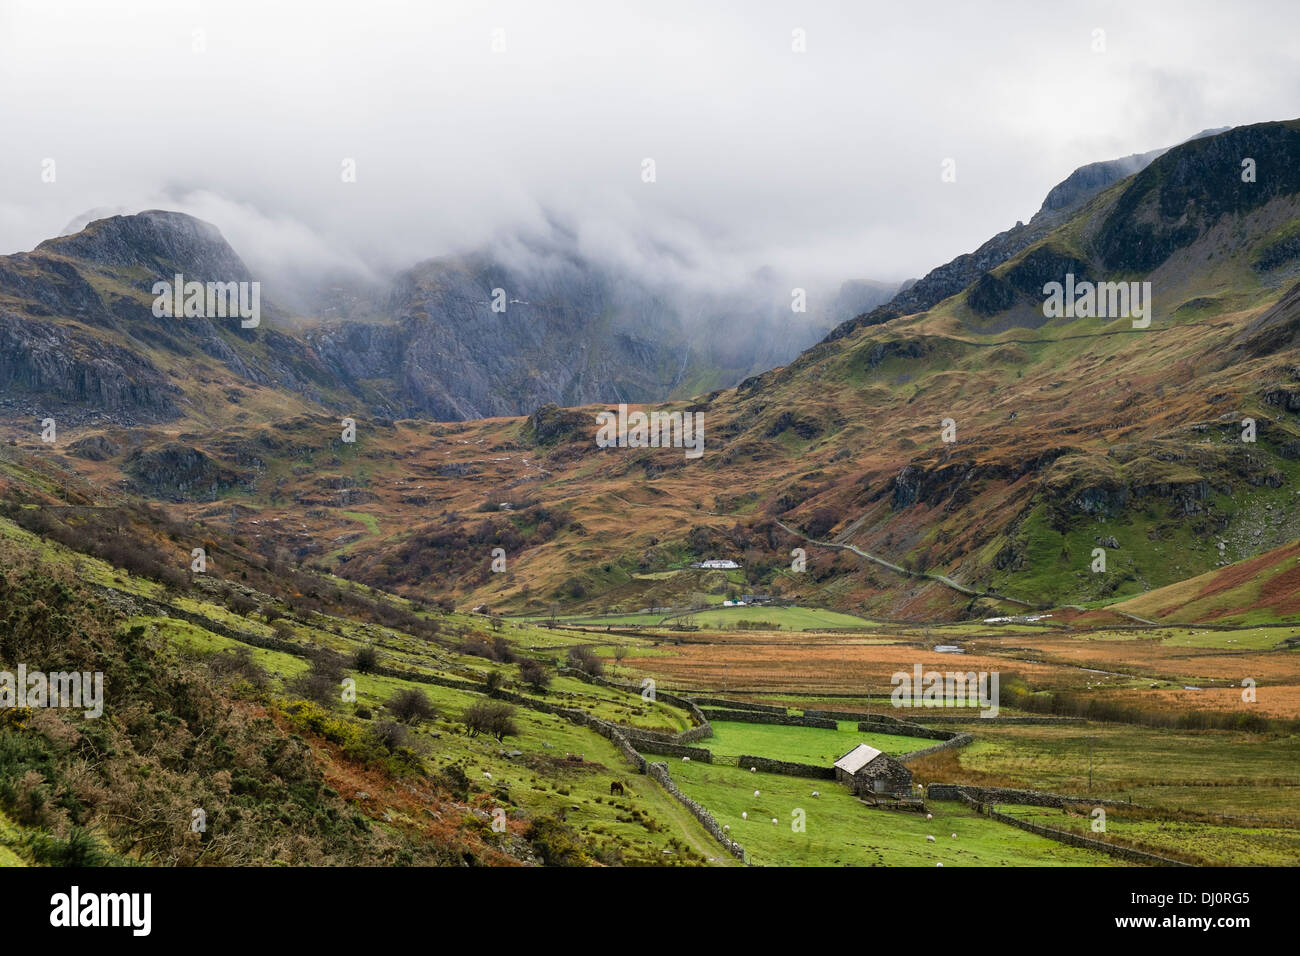 View up Nant Ffrancon valley to Cwm Idwal and Glyderau covered in low cloud in mountains of Snowdonia North Wales UK Britain Stock Photo